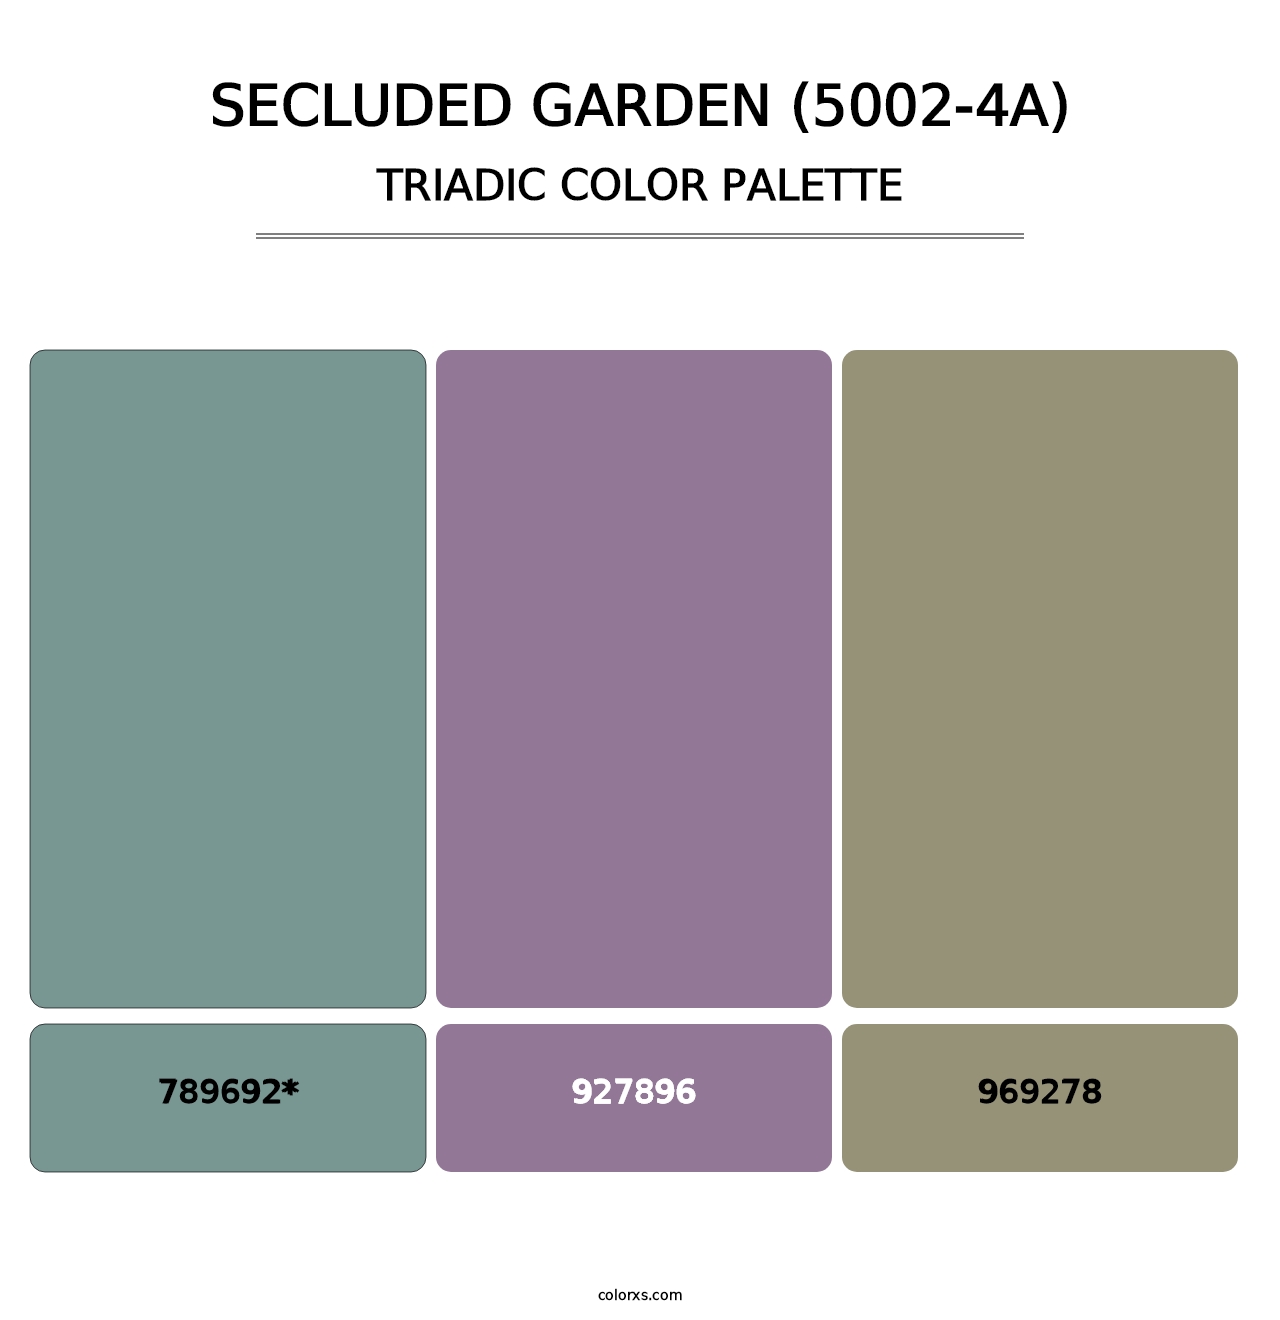 Secluded Garden (5002-4A) - Triadic Color Palette